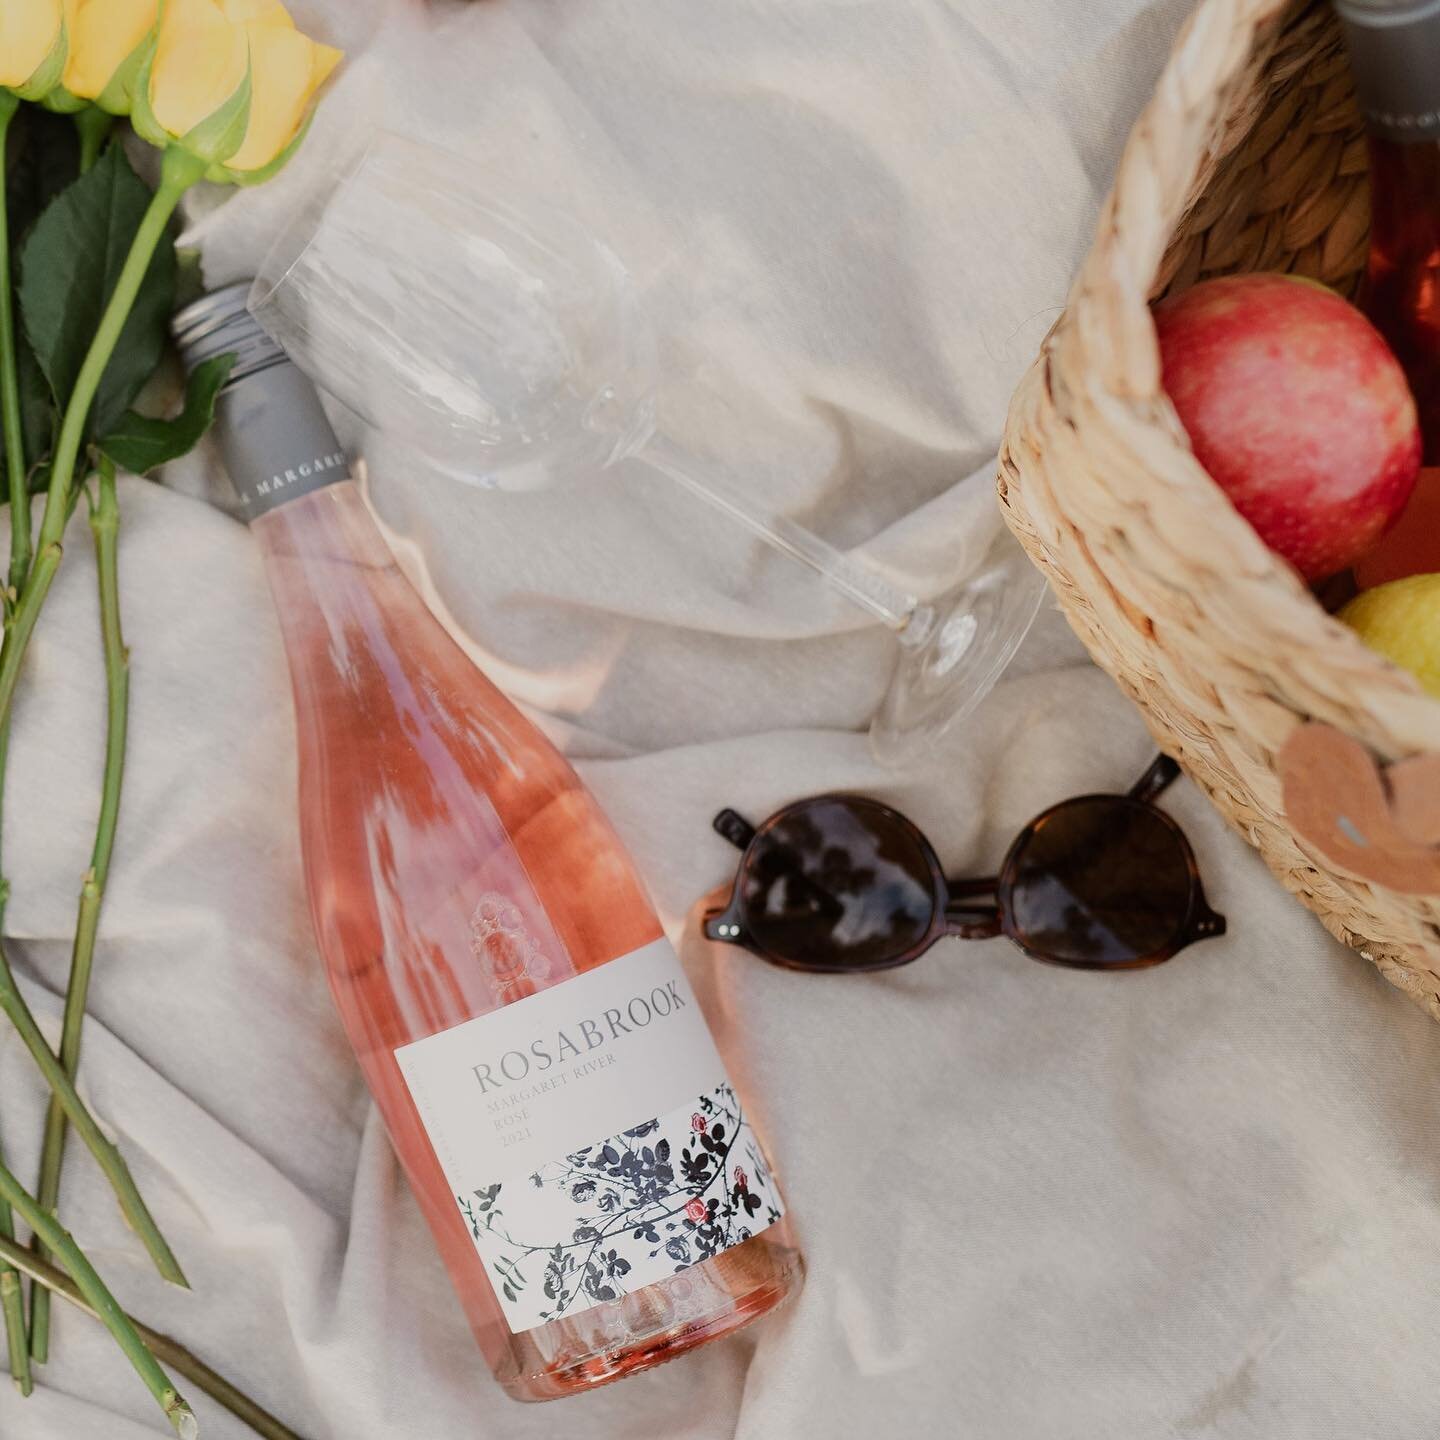 Summer is almost here so pop into @danmurphys Busselton from 3pm to try our beautiful refreshing Ros&eacute; and stock up for the silly season!🍷🌹